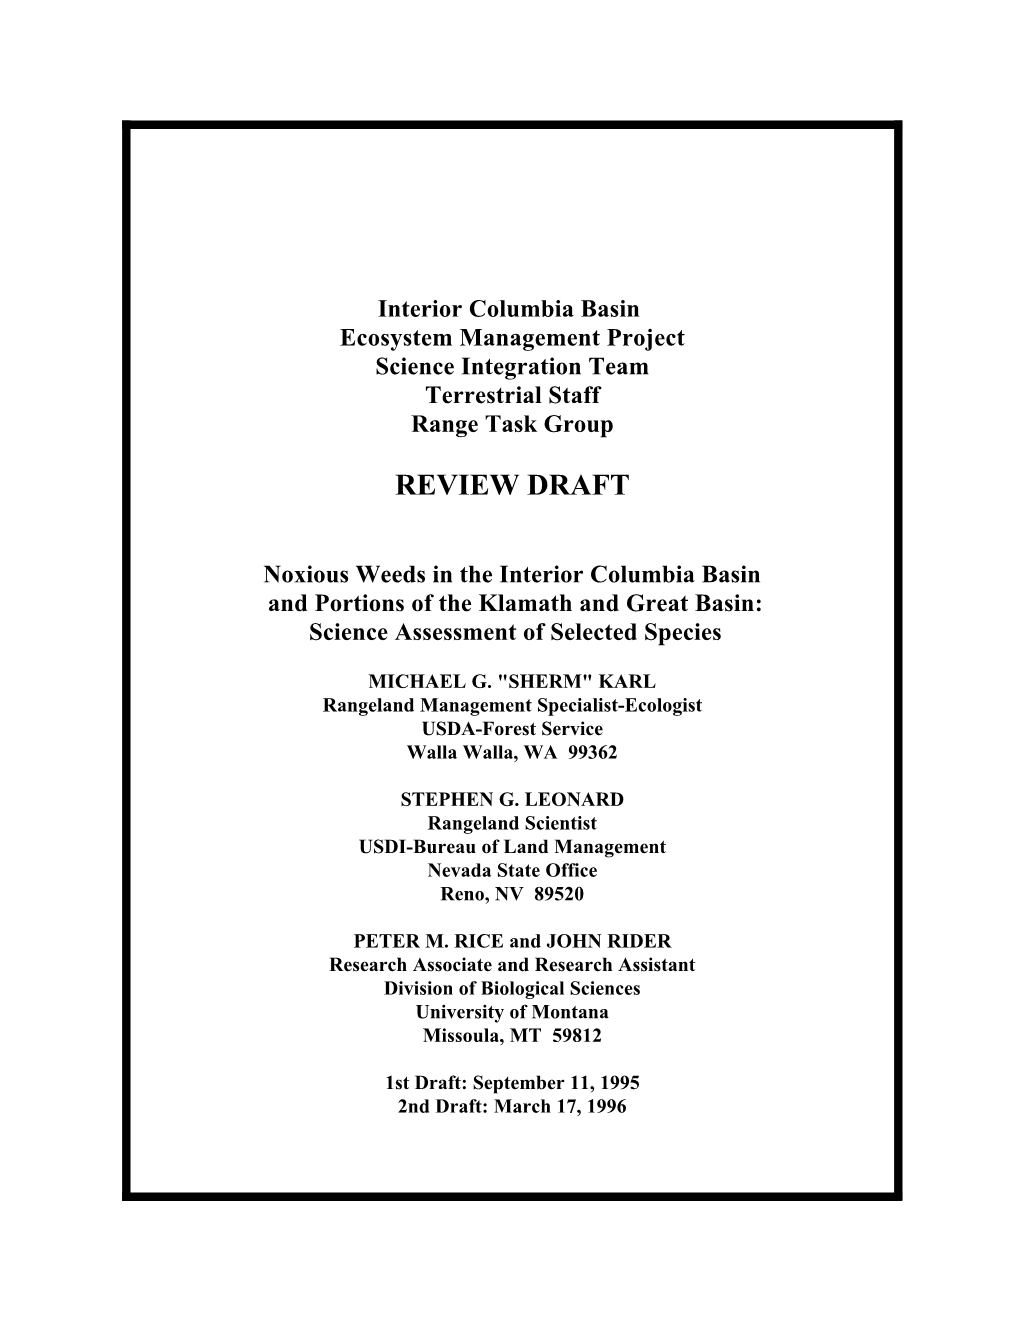 Noxious Weeds in the Interior Columbia Basin and Portions of the Klamath and Great Basin: Science Assessment of Selected Species